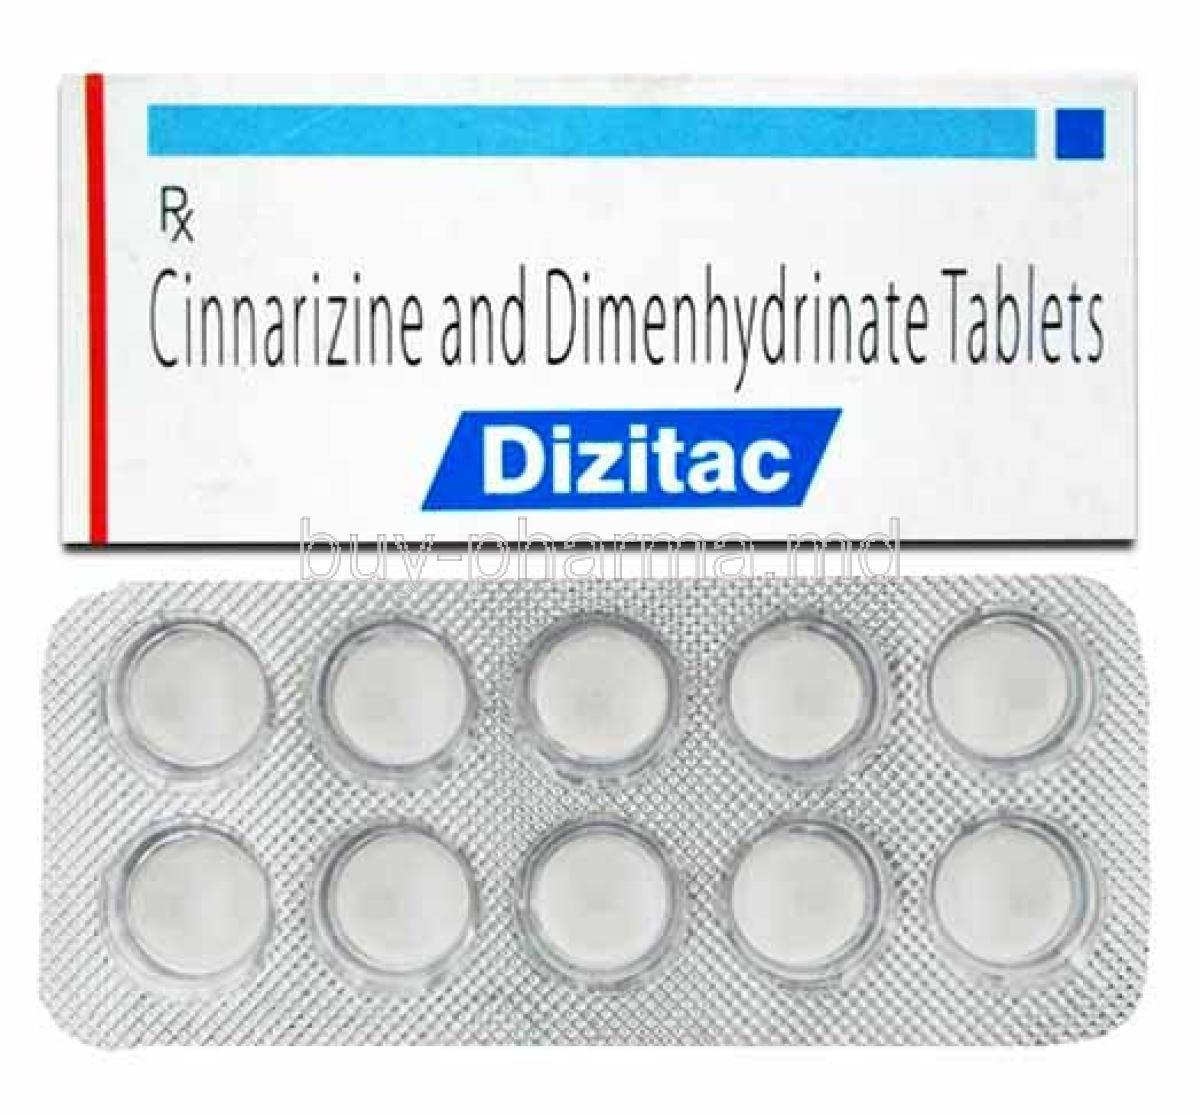 Dizitac, Cinnarizine and Dimenhydrinate box and tablets